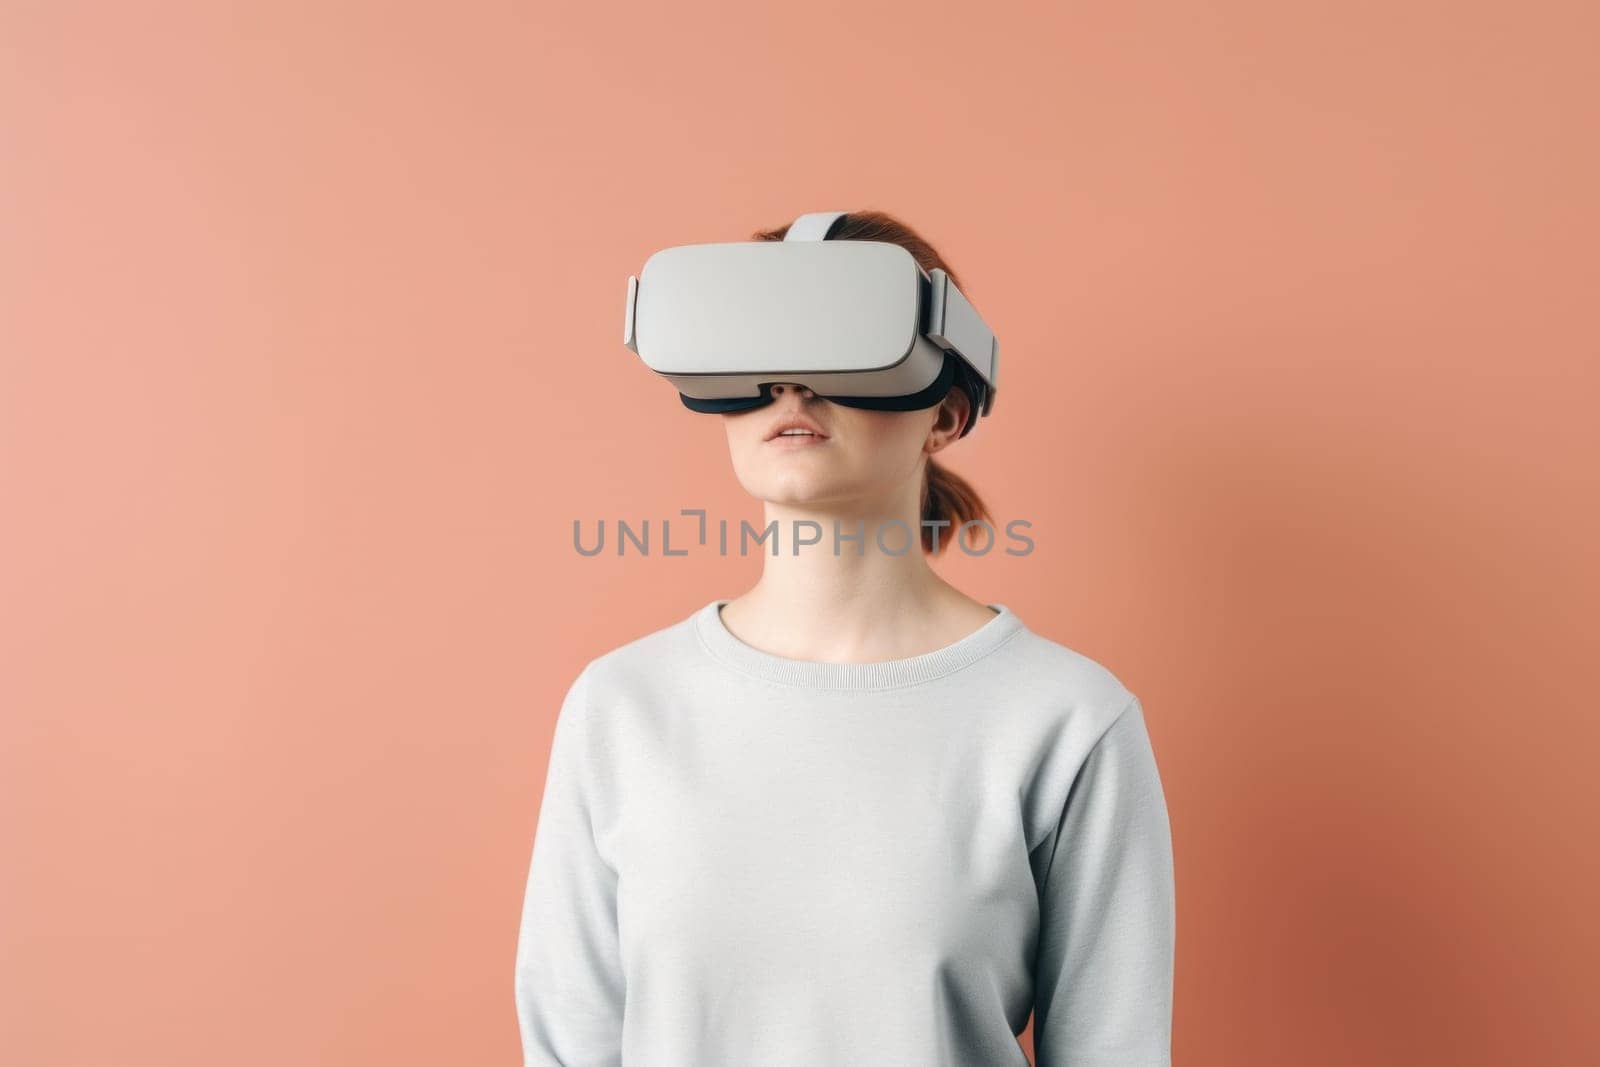 A woman wearing a virtual reality headset against a pink background